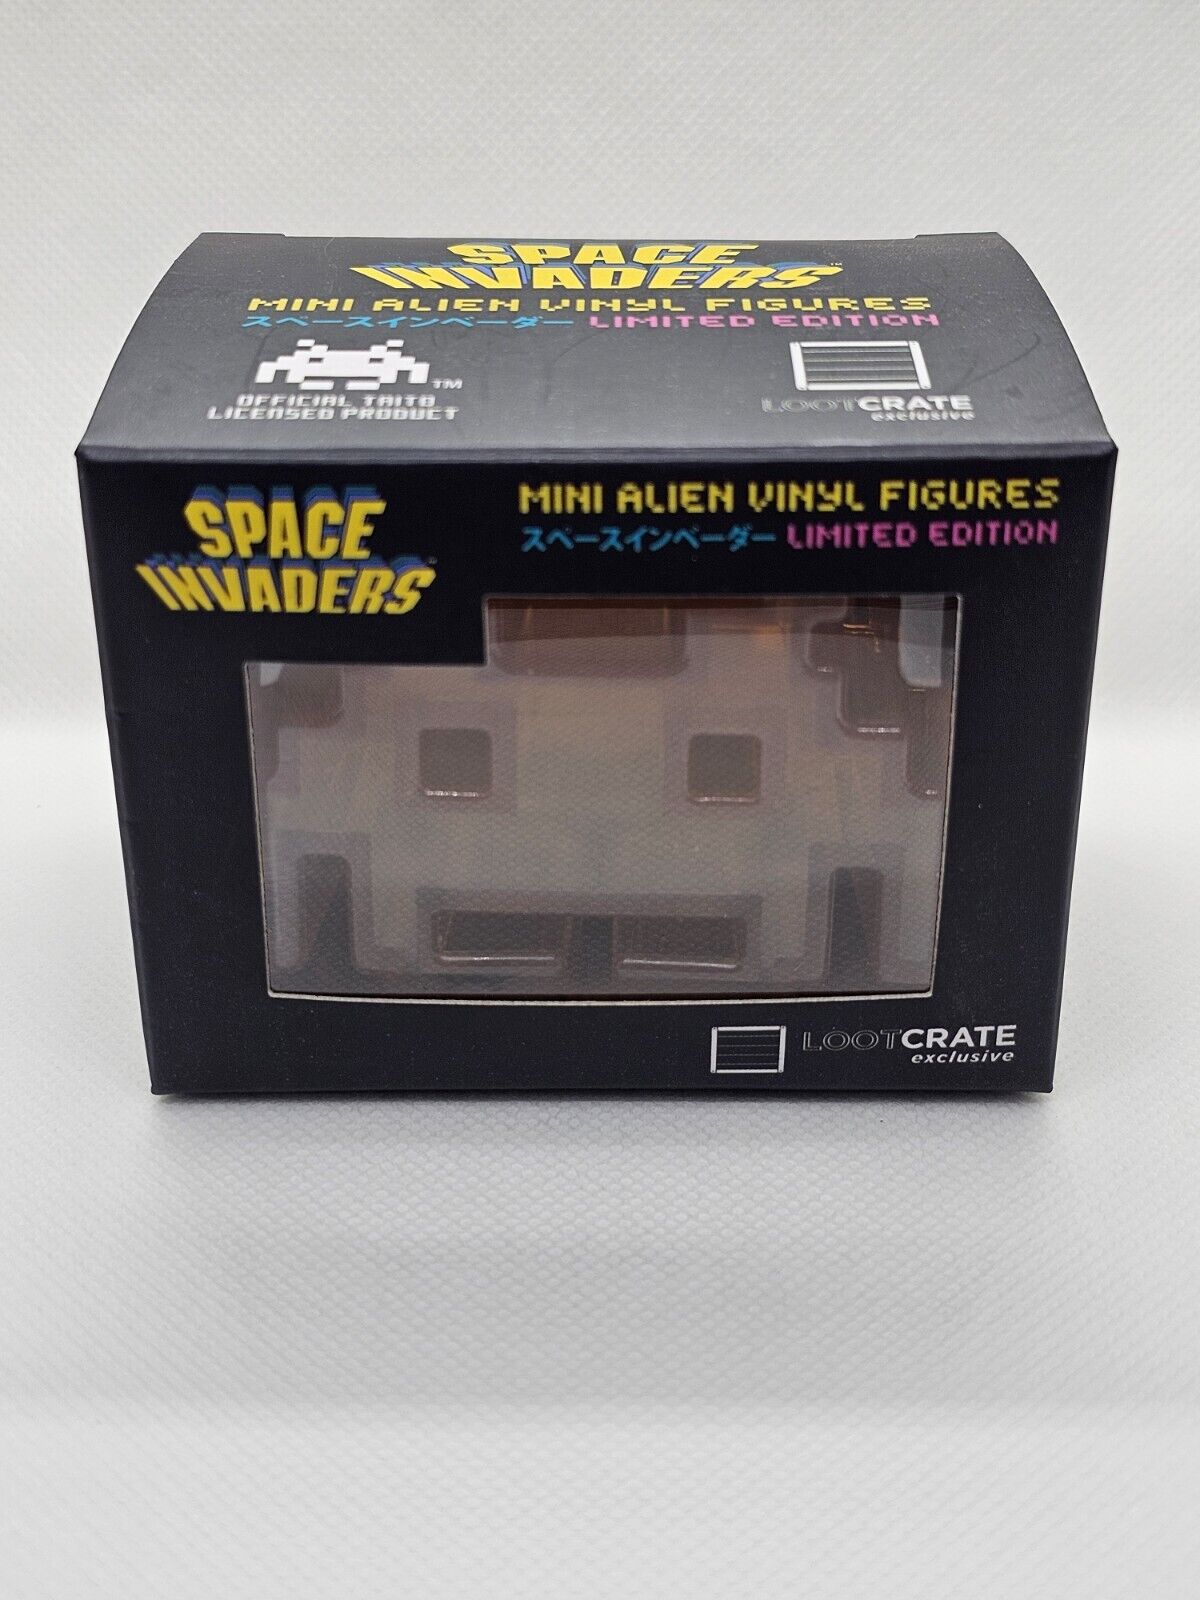 Loot Crate Exclusive Space Invaders Mini Alien Vinyl Figure Limited Edition